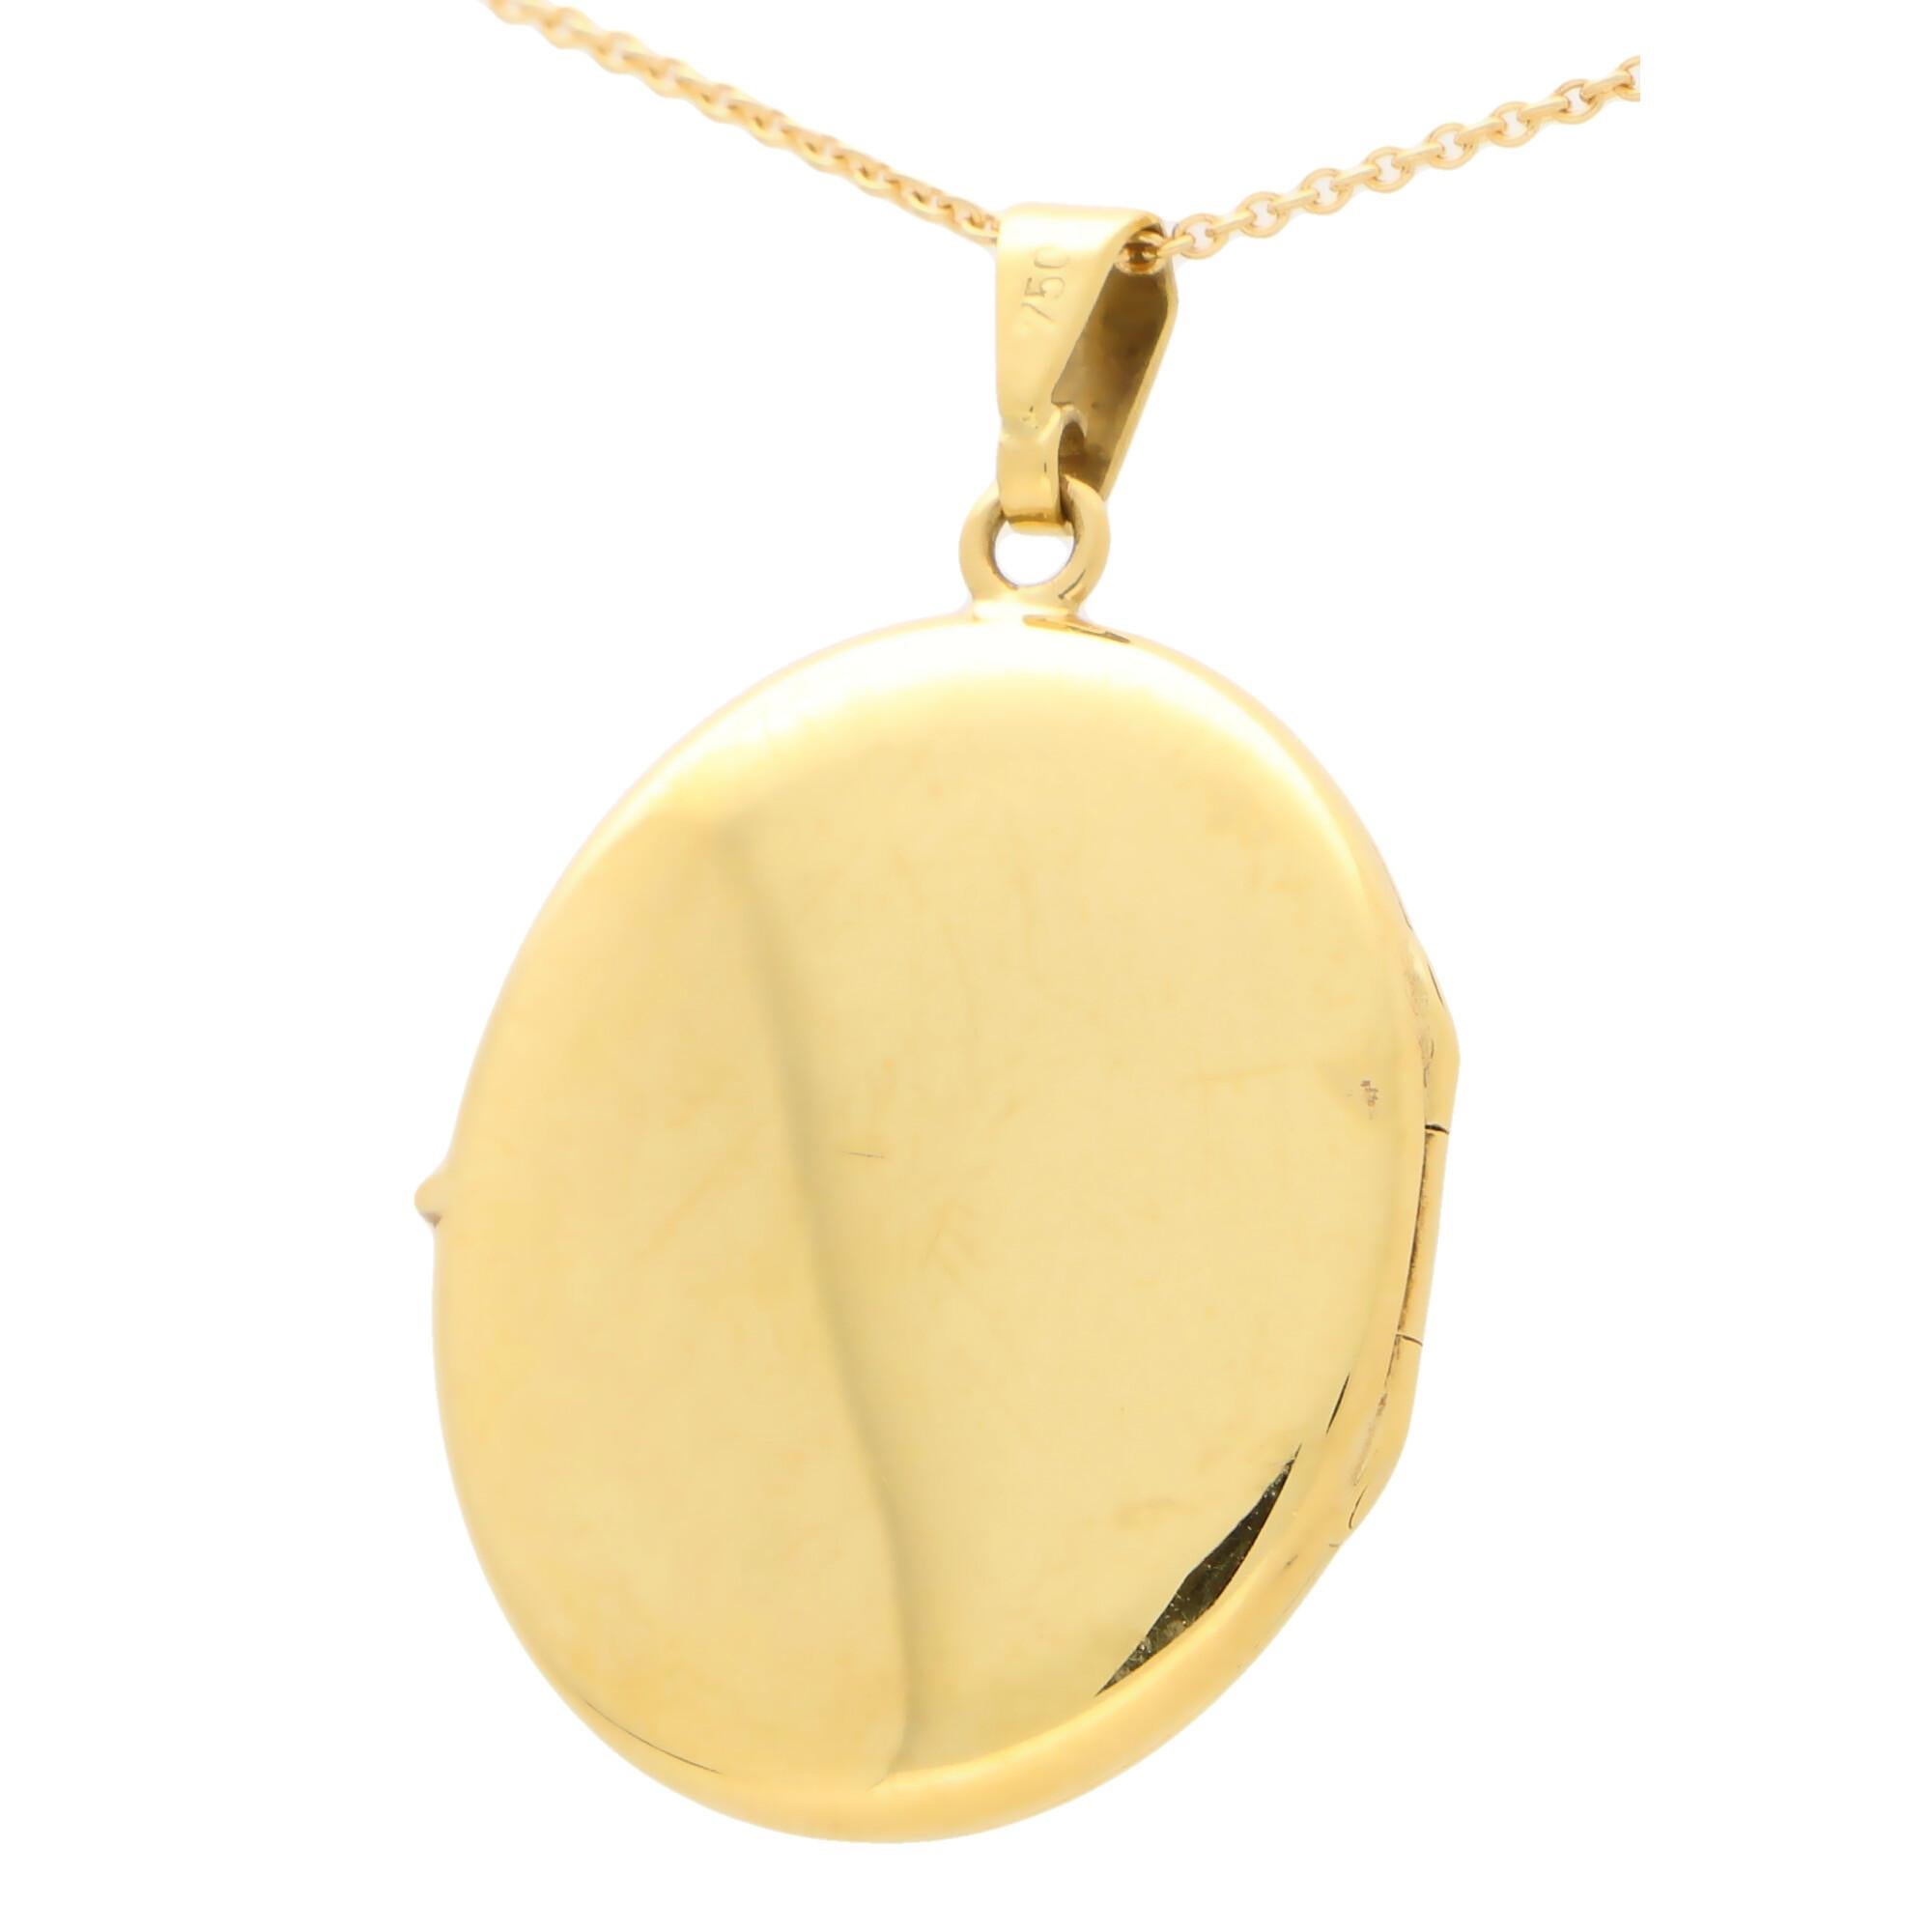 An elegant oval locket set in 18k yellow gold.

The piece is designed in the classic oval locket shape and once opened has two spaces to place small photographs. Due to the design the locket could easily be worn for everyday. The catch on this piece